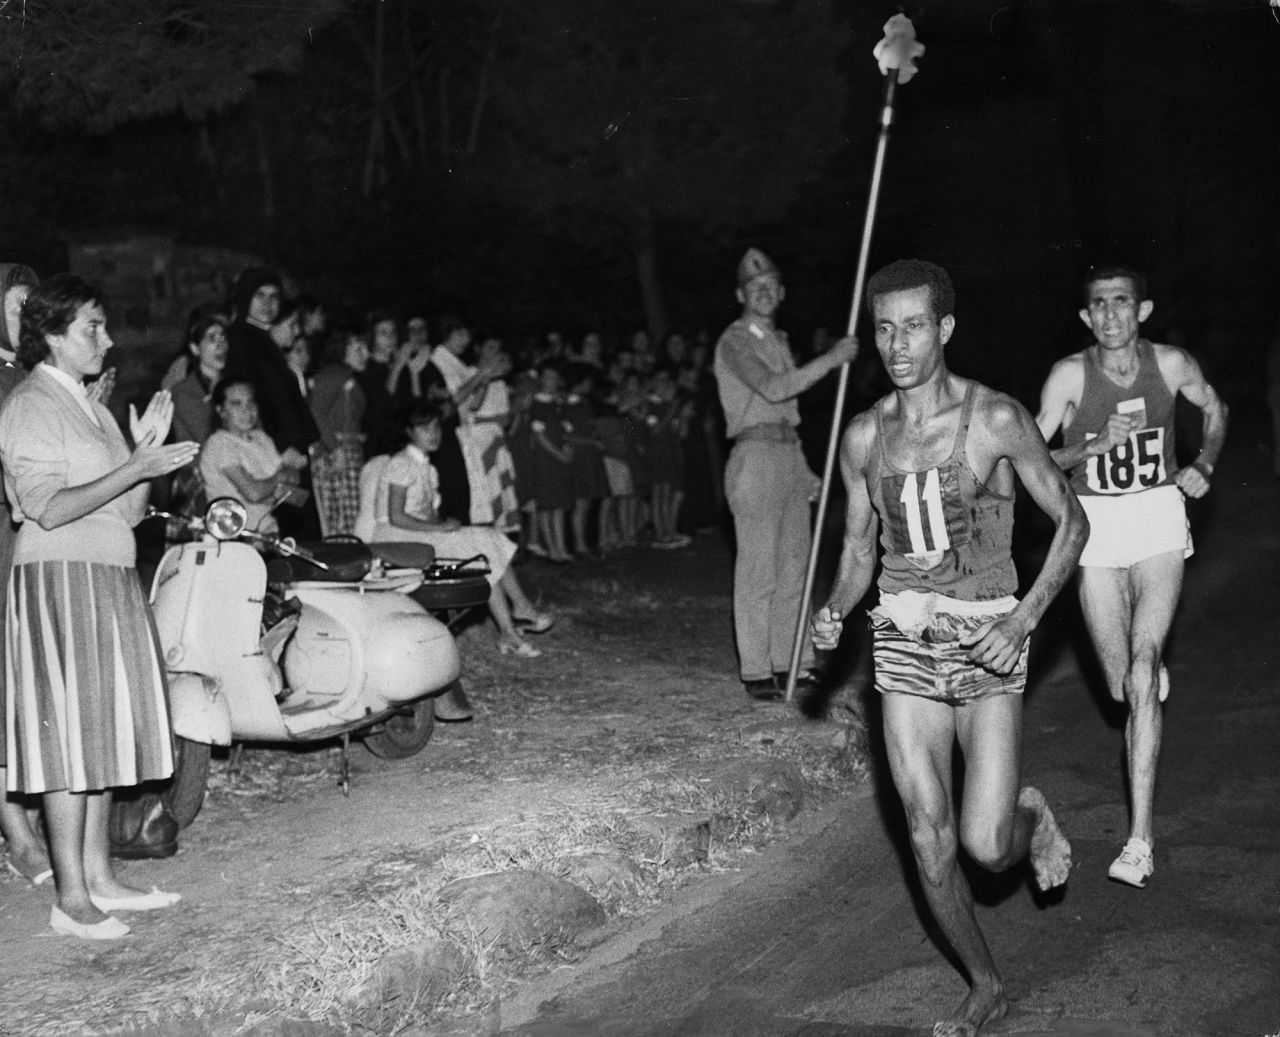 Ethiopian runner Abebe Bikila became the first Black African to win Olympic gold when he won the marathon in world-record time in 1960. And he did it in his bare feet, just the way he had trained.